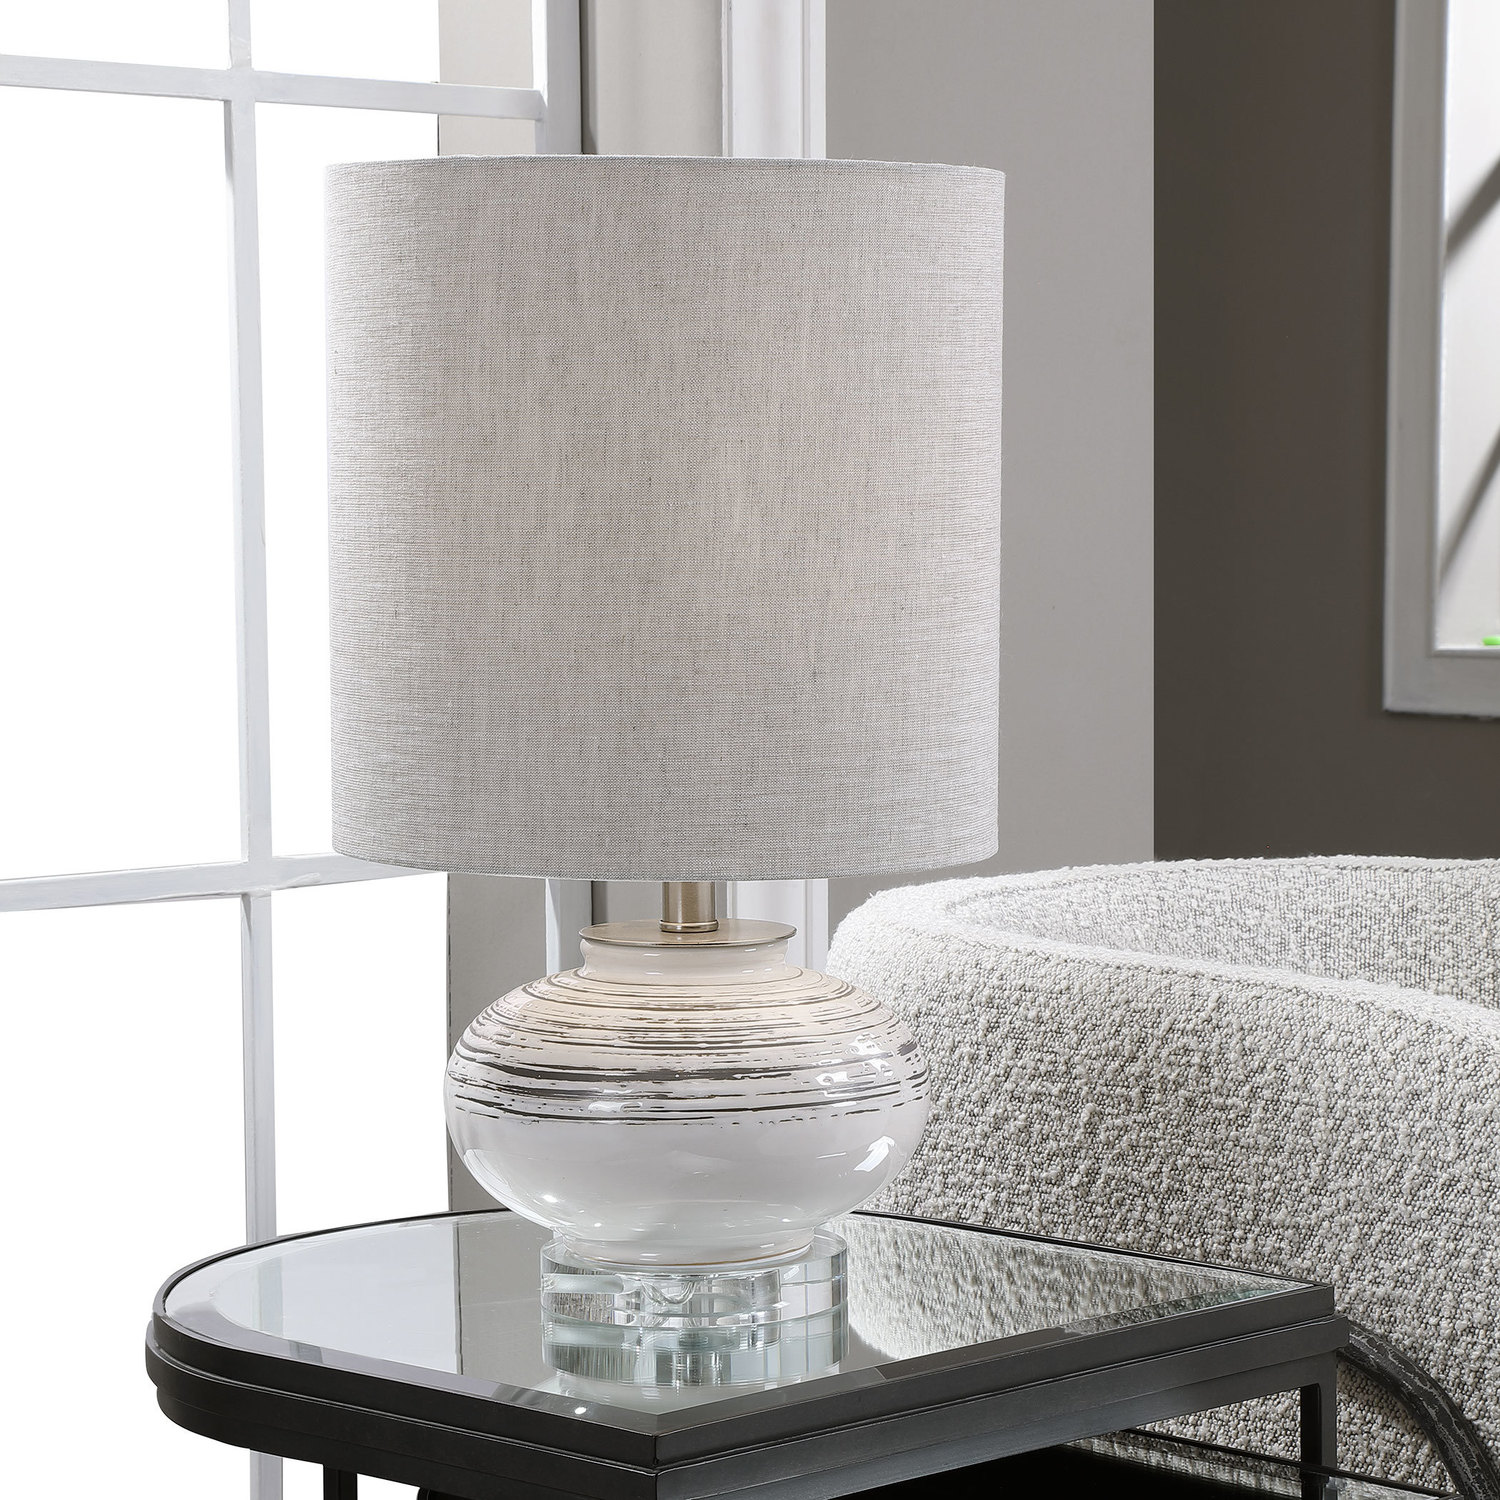 cool table lamps for bedroom Uttermost Off-White Accent Lamp Inspired By The Bark Of A Birch Tree, This Accent Lamp Features A Ceramic Base Finished In Off-white With Dark Bronze Accents And Noticeable Texture And Distressing. The Piece Also Has A Crystal Foot And Brushed Nickel Details.